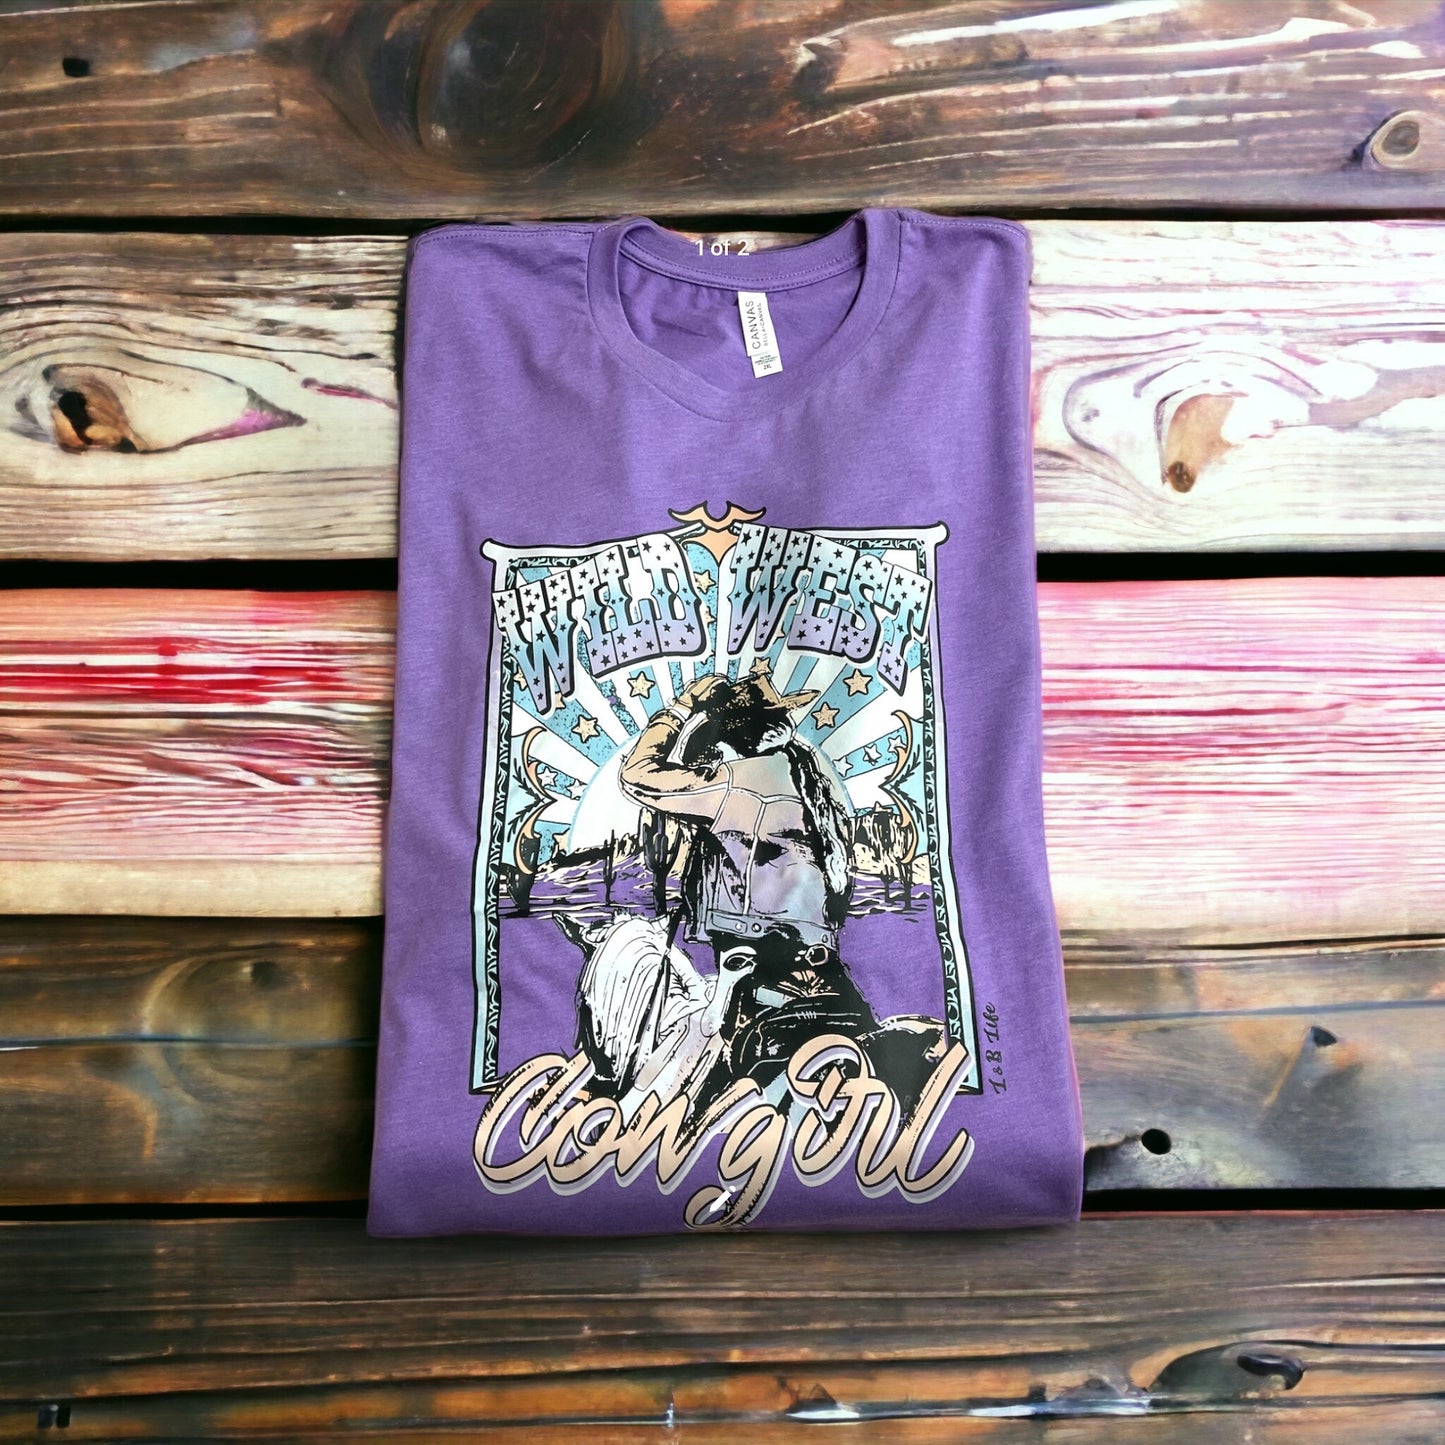 The “Wild West Cowgirl” Graphic Tee